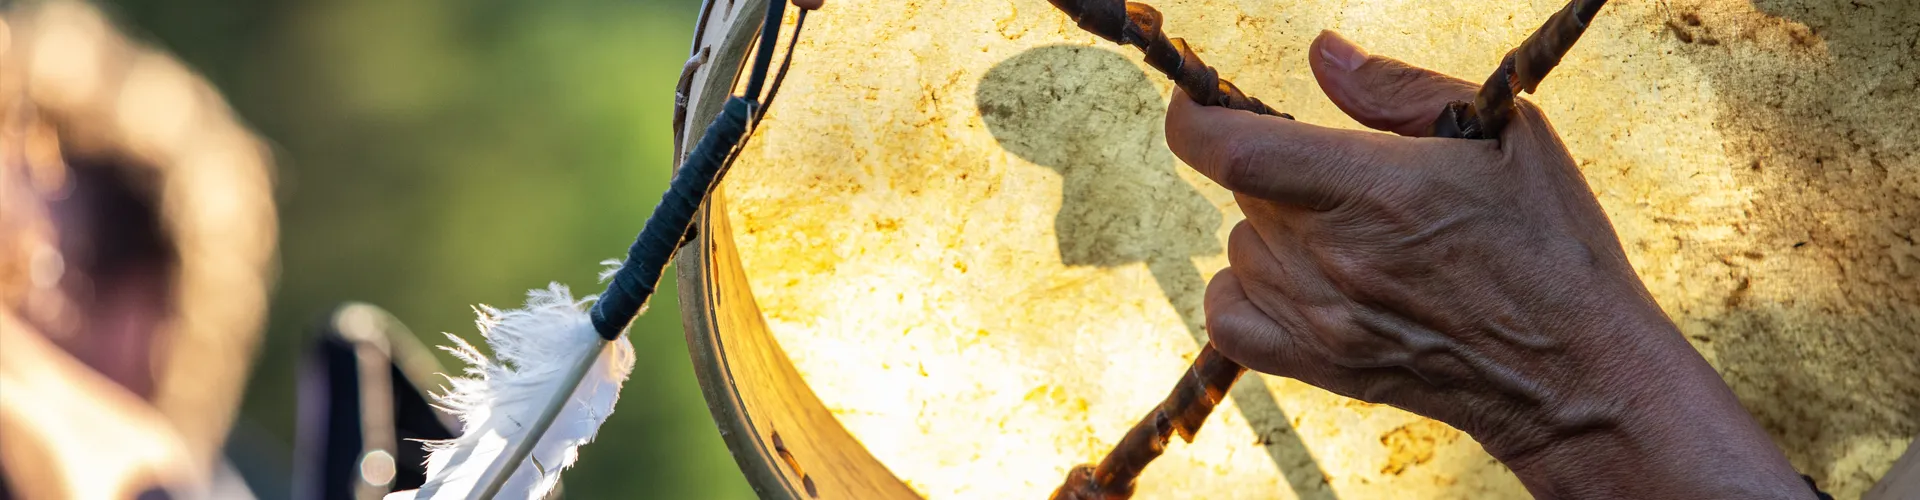 A close-up photo of a hand using a ceremonial drum with feathers on it.